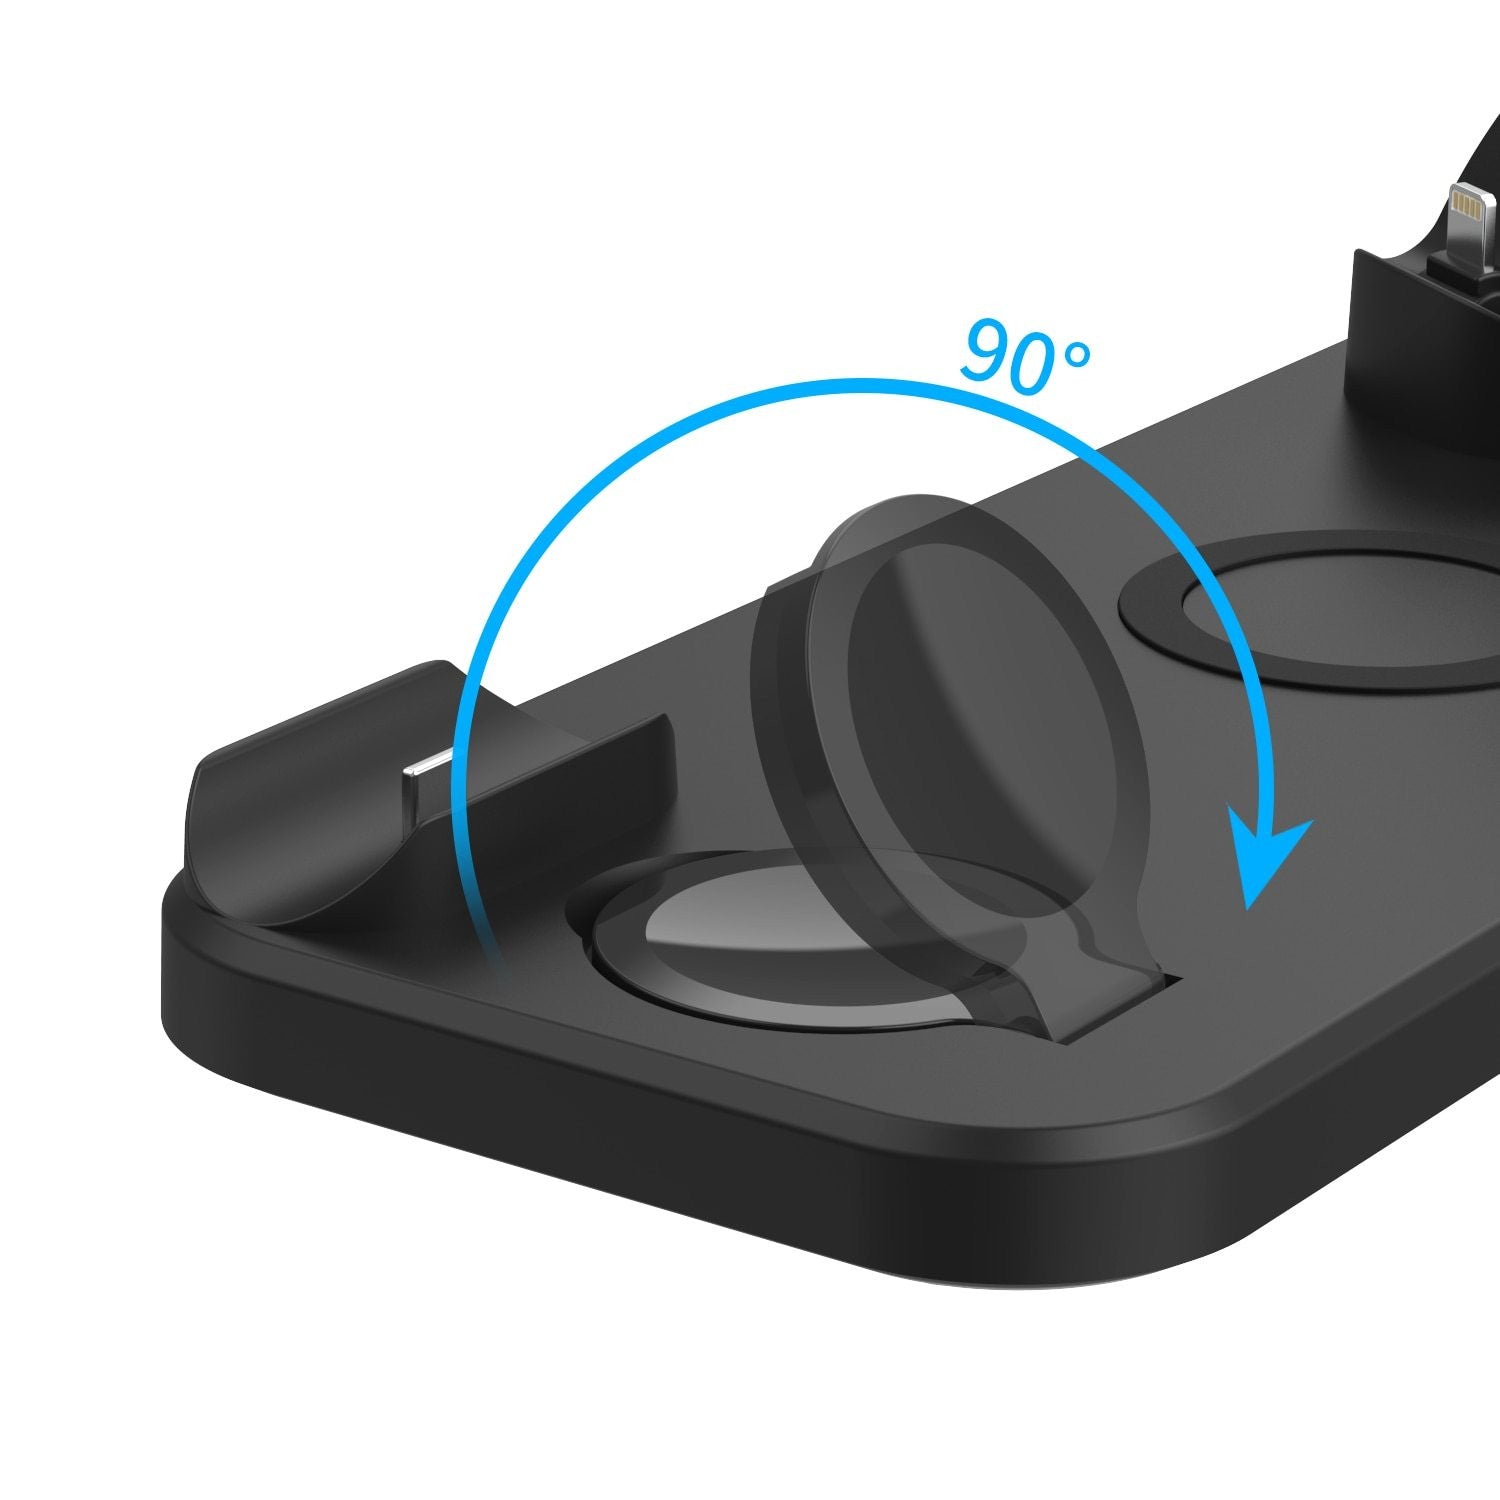 6-in-1 Wireless Charging Station - Influcase